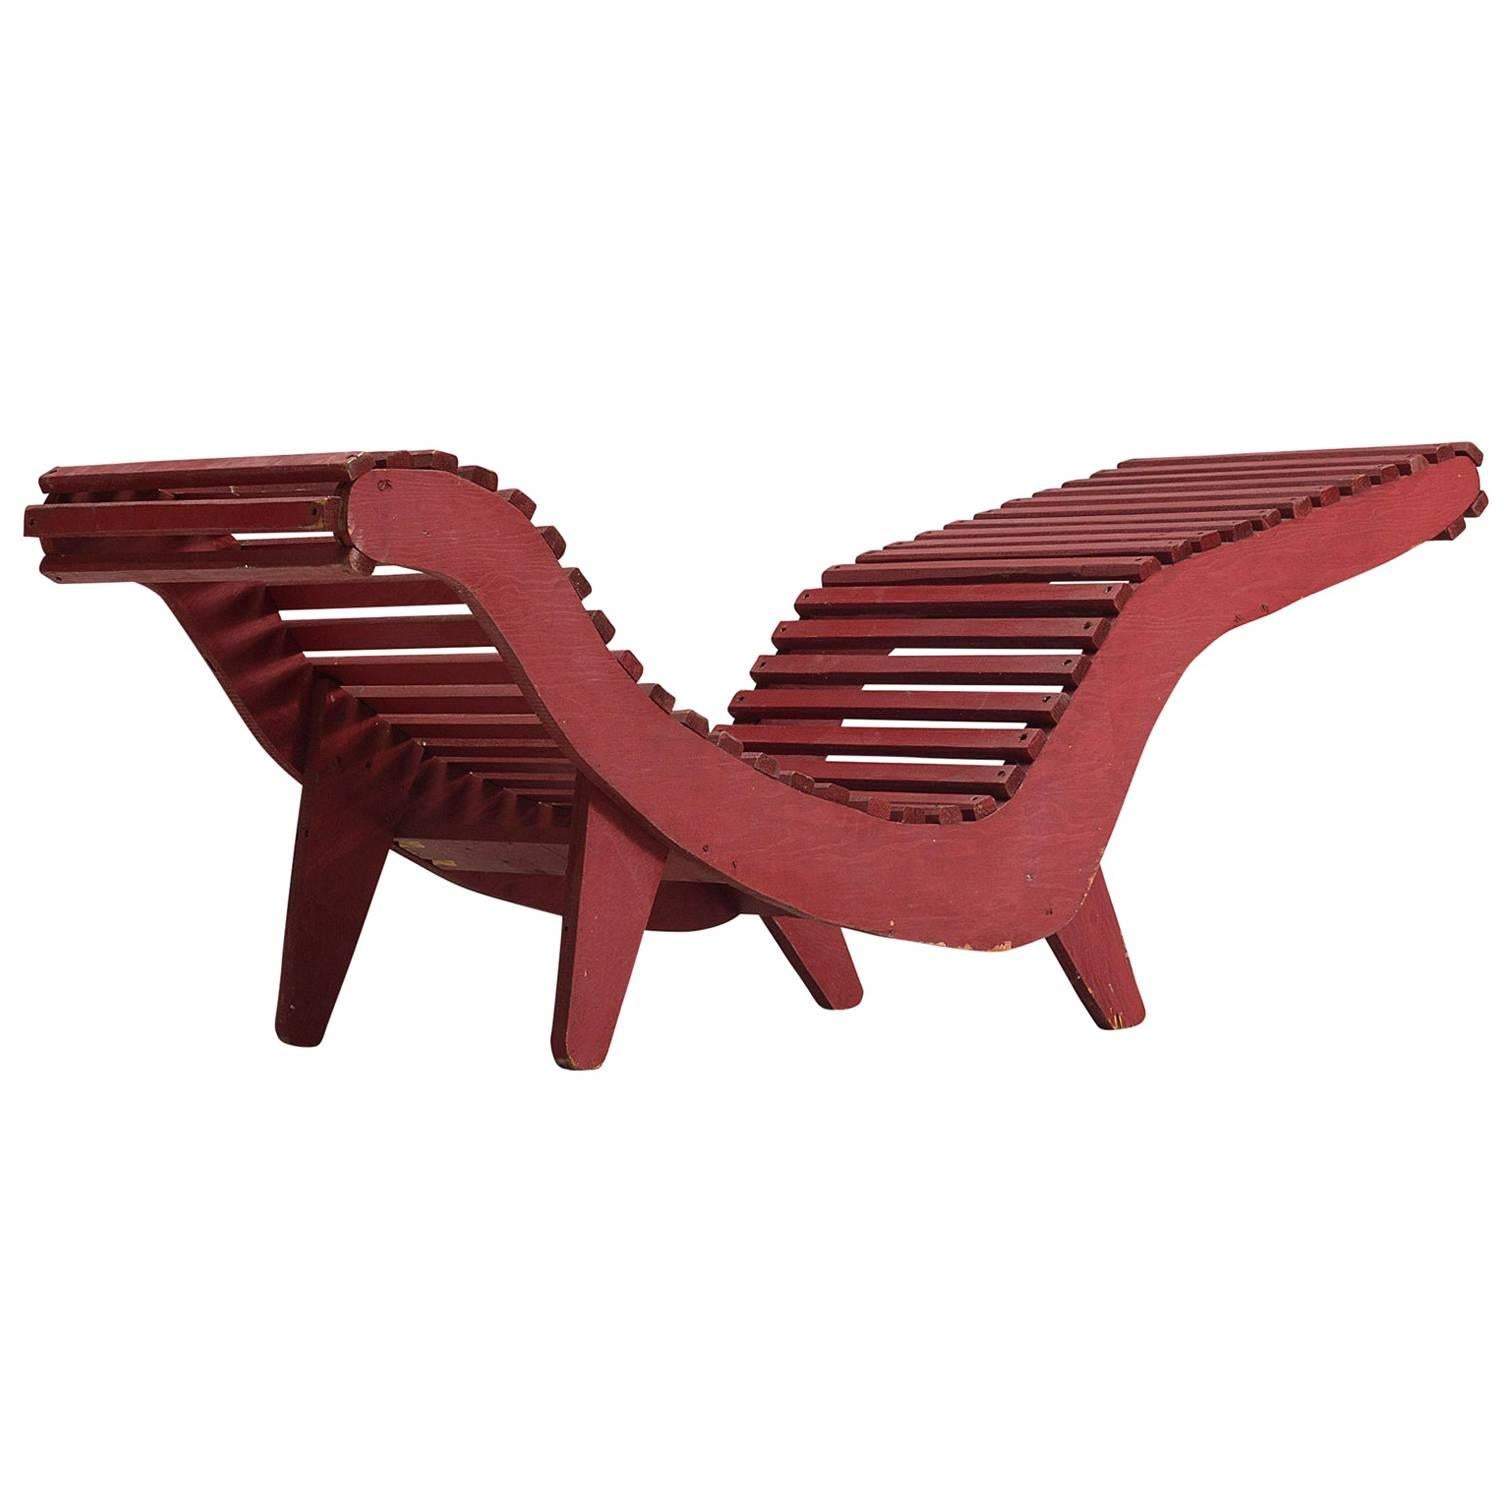 Klaus Grabe Deep Red Chaise Longue